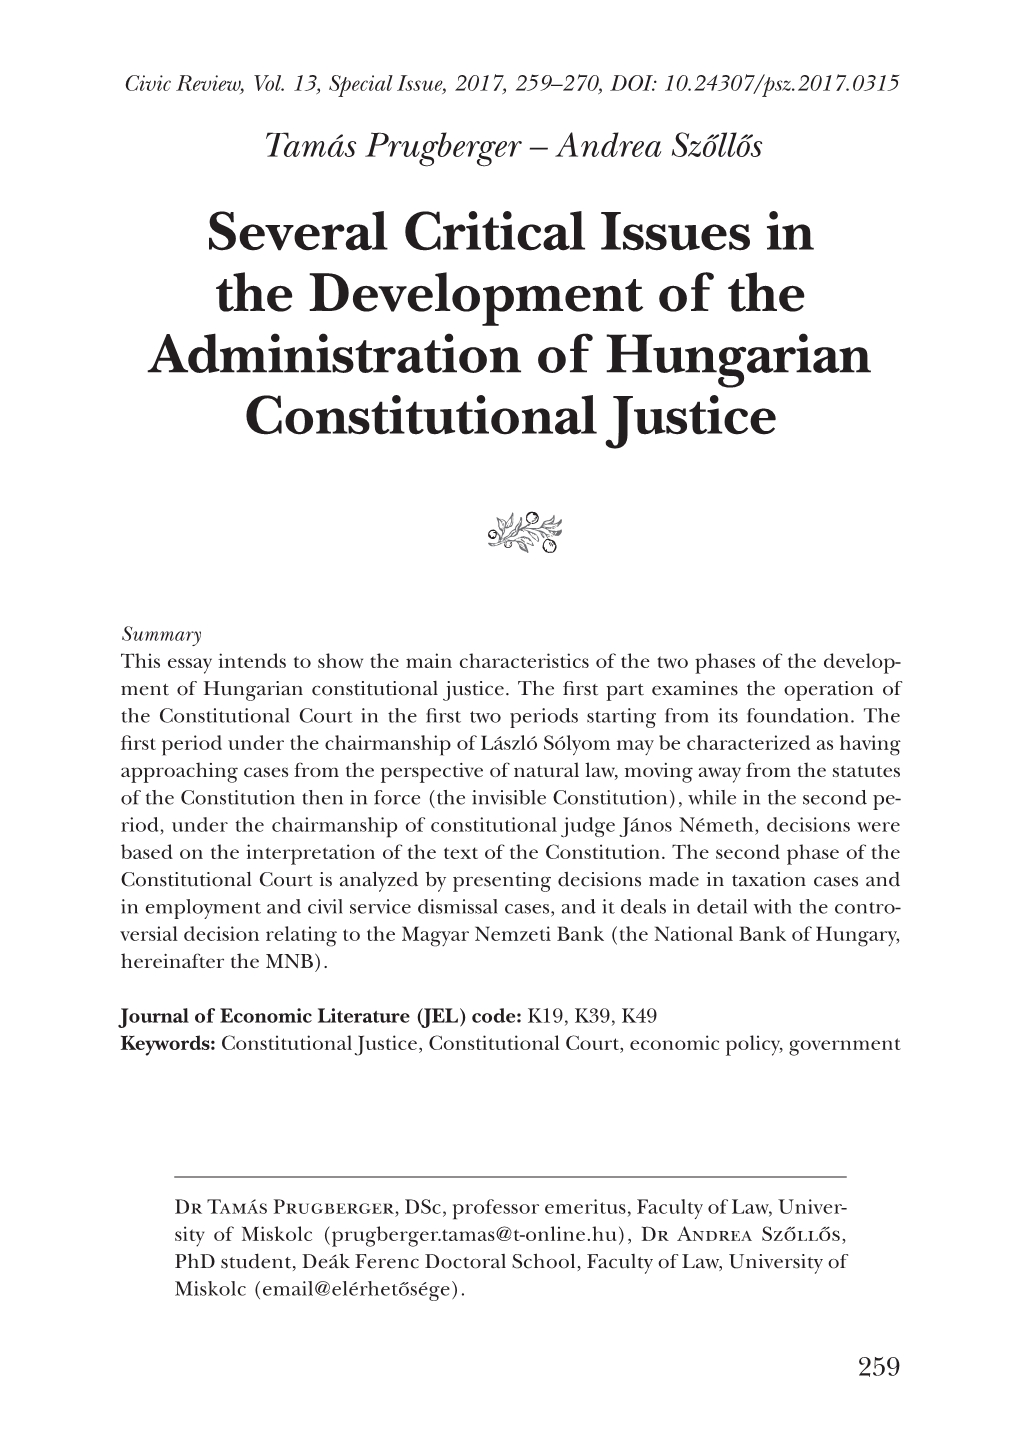 Several Critical Issues in the Development of the Administration of Hungarian Constitutional Justice